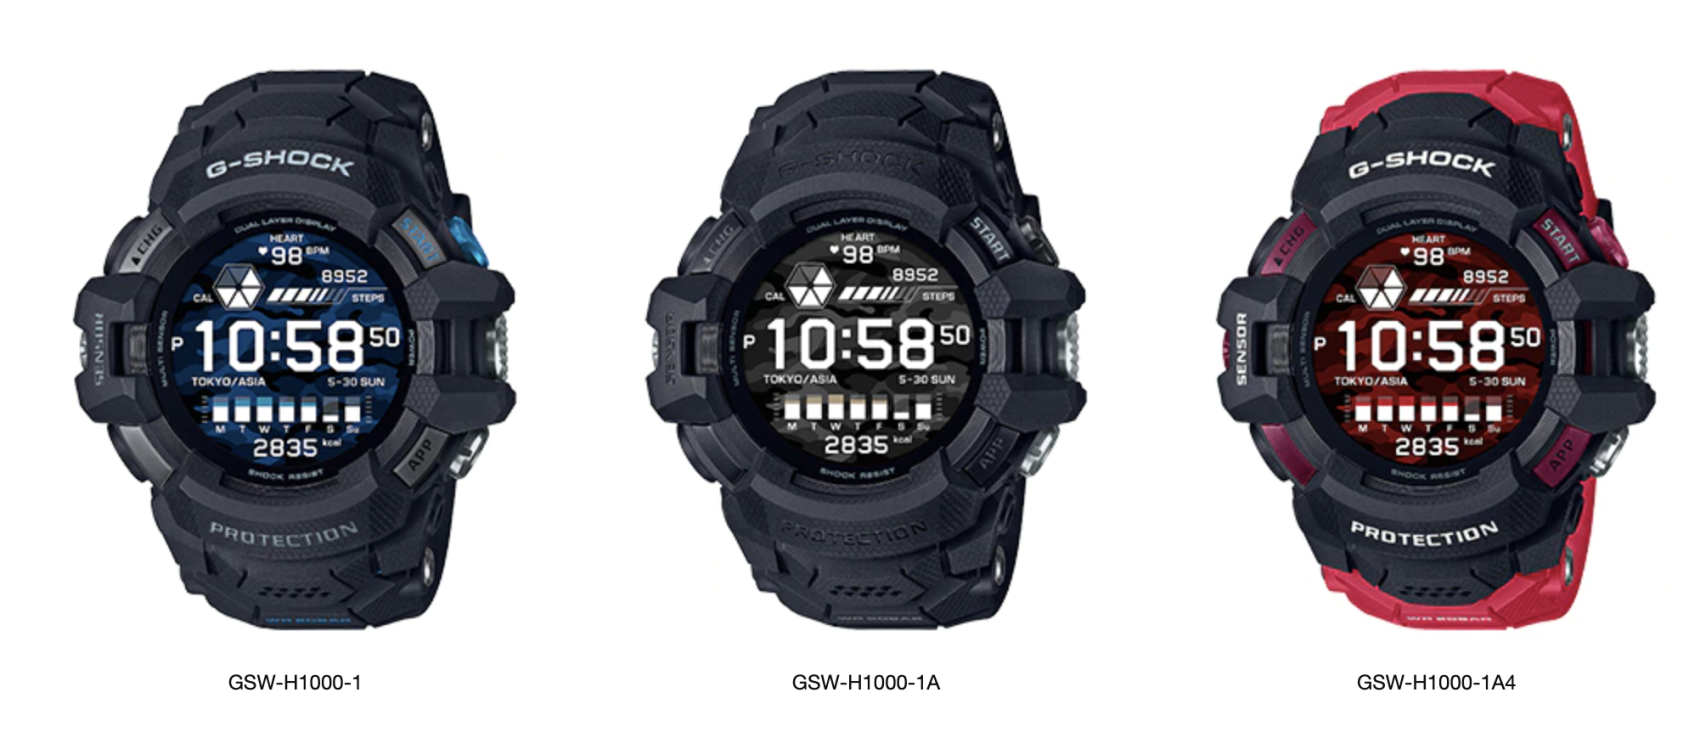 Casio to release first G-SHOCK smartwatch with Wear OS by Google 